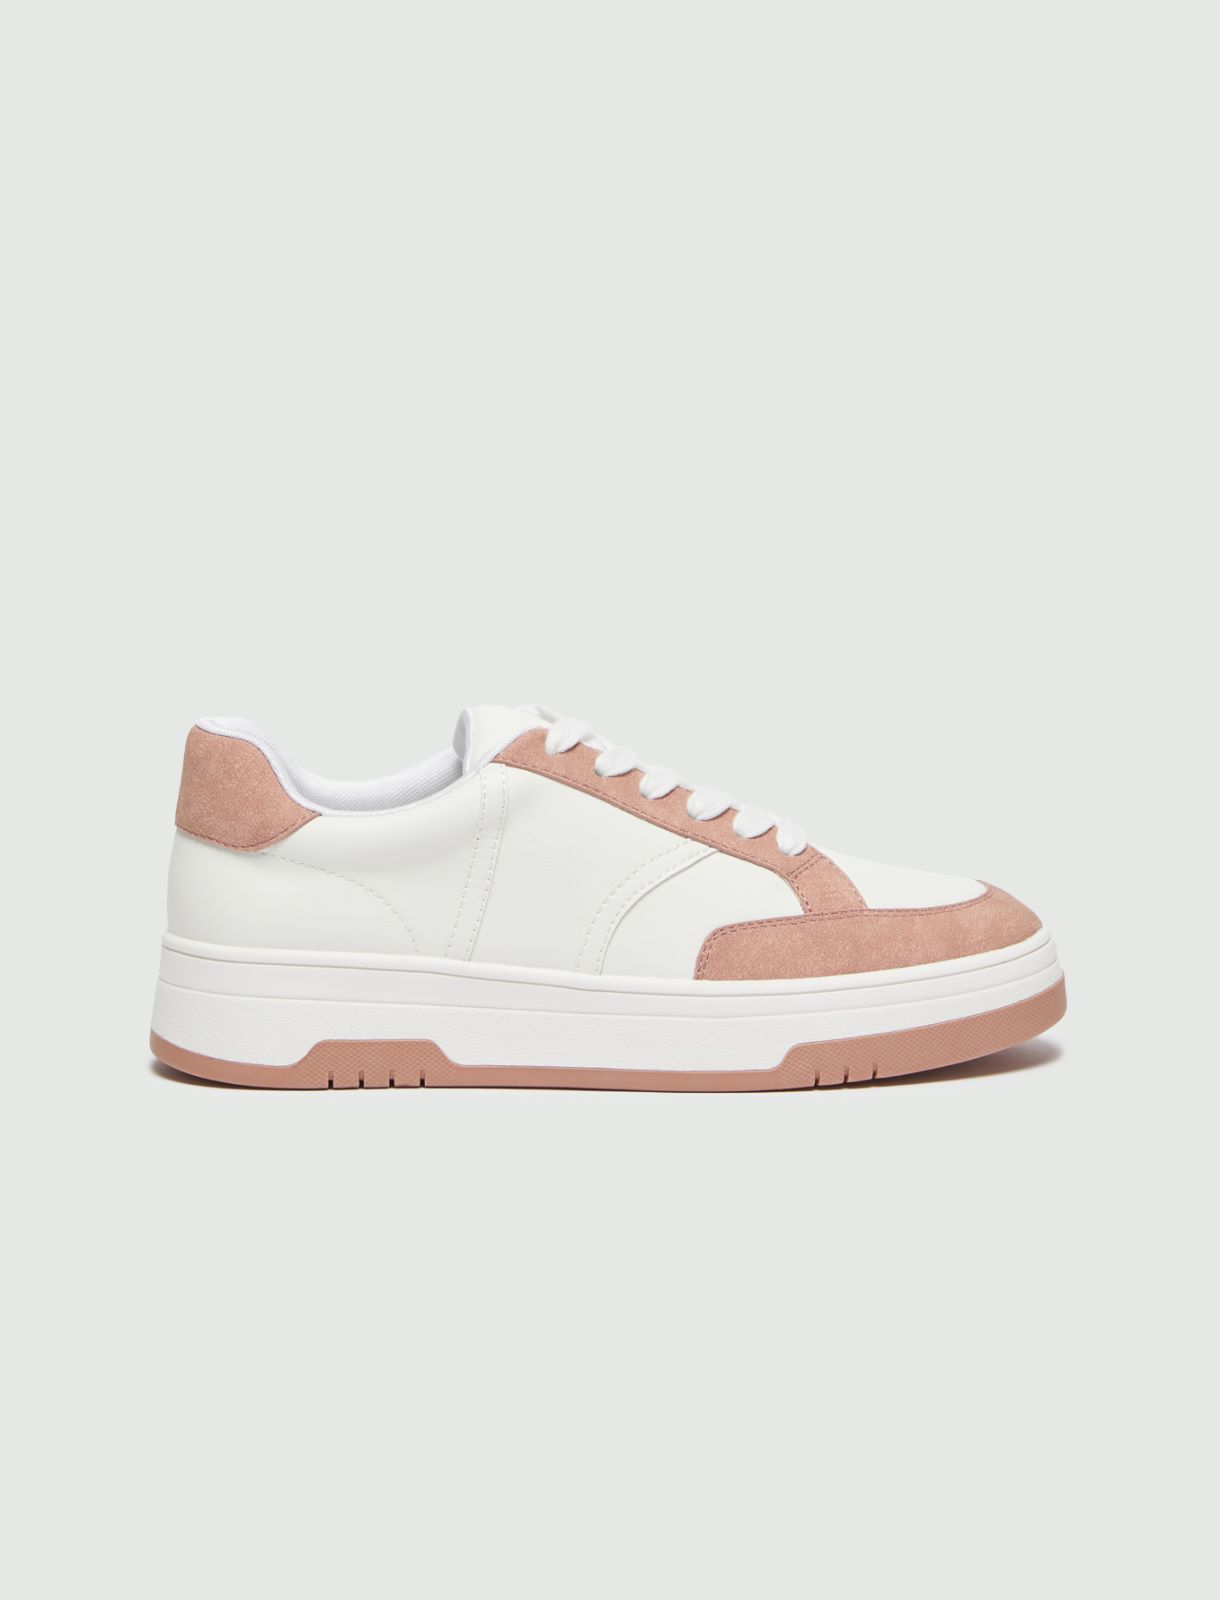 Sneakers with contrast detail - Pink - Persona